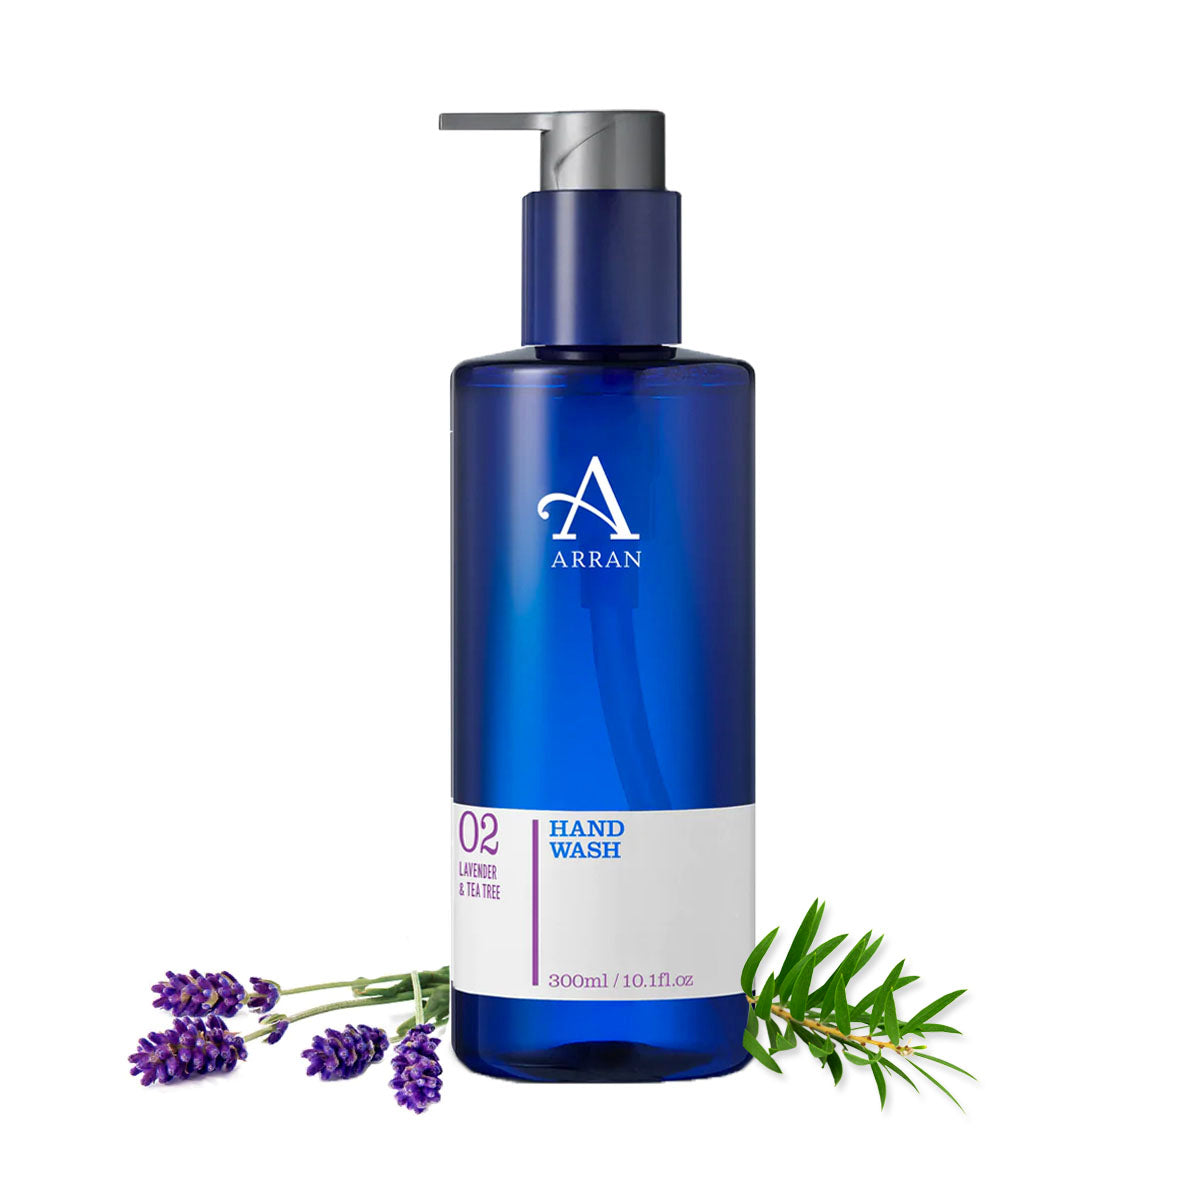 An image of ARRAN Apothecary Lavender & Tea Tree Hand Wash | Made in Scotland | Lavender & T...